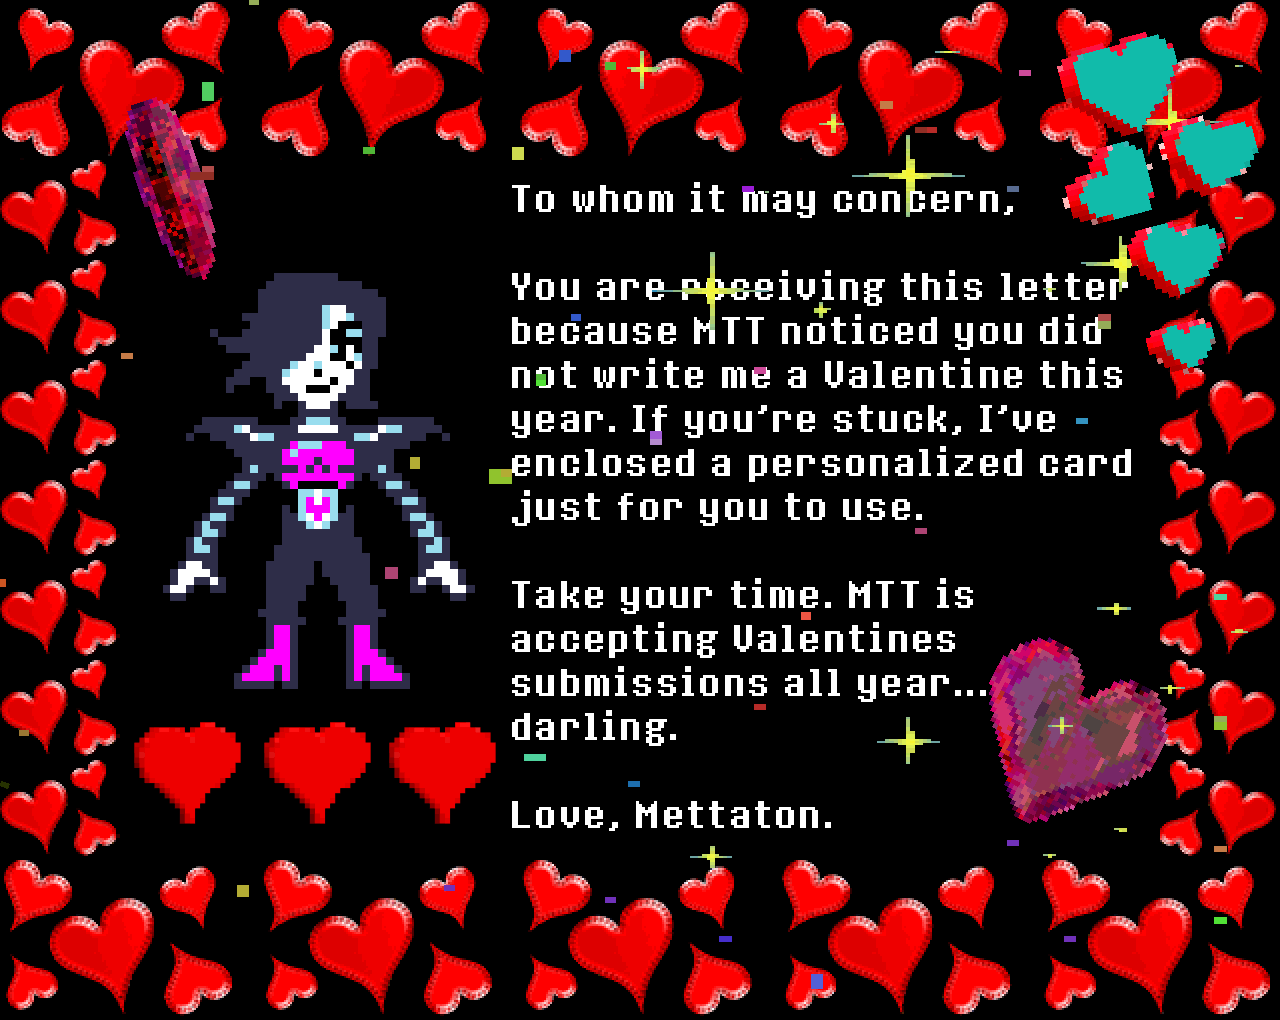 Mettaton: To whom it may concern,

You are receiving this letter because MTT noticed you did not write me a Valentine this year. If you’re stuck, I’ve enclosed a personalized card just for you to use.

Take your time. MTT is accepting Valentines submissions all year… darling.

Love, Mettaton.